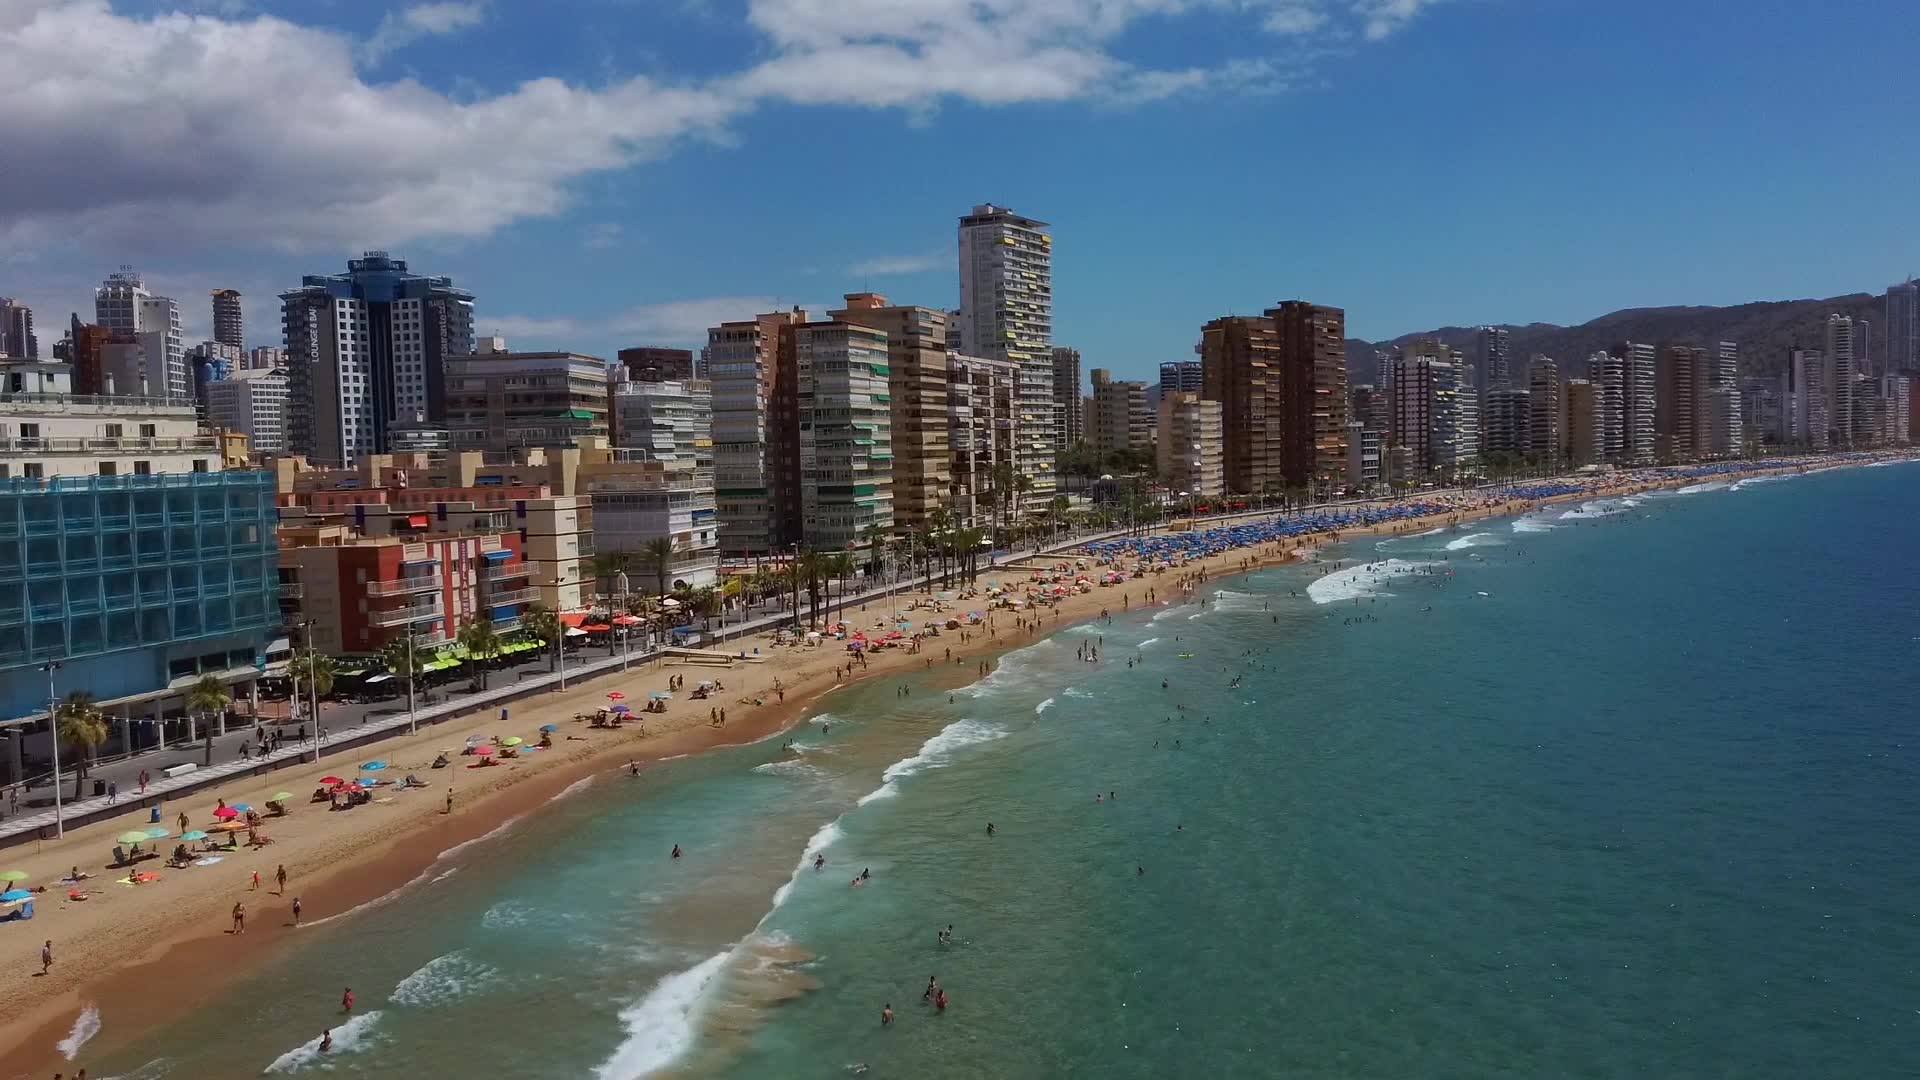 Benidorm has a COVID-19 infection rate that's three times higher than Spain's national average